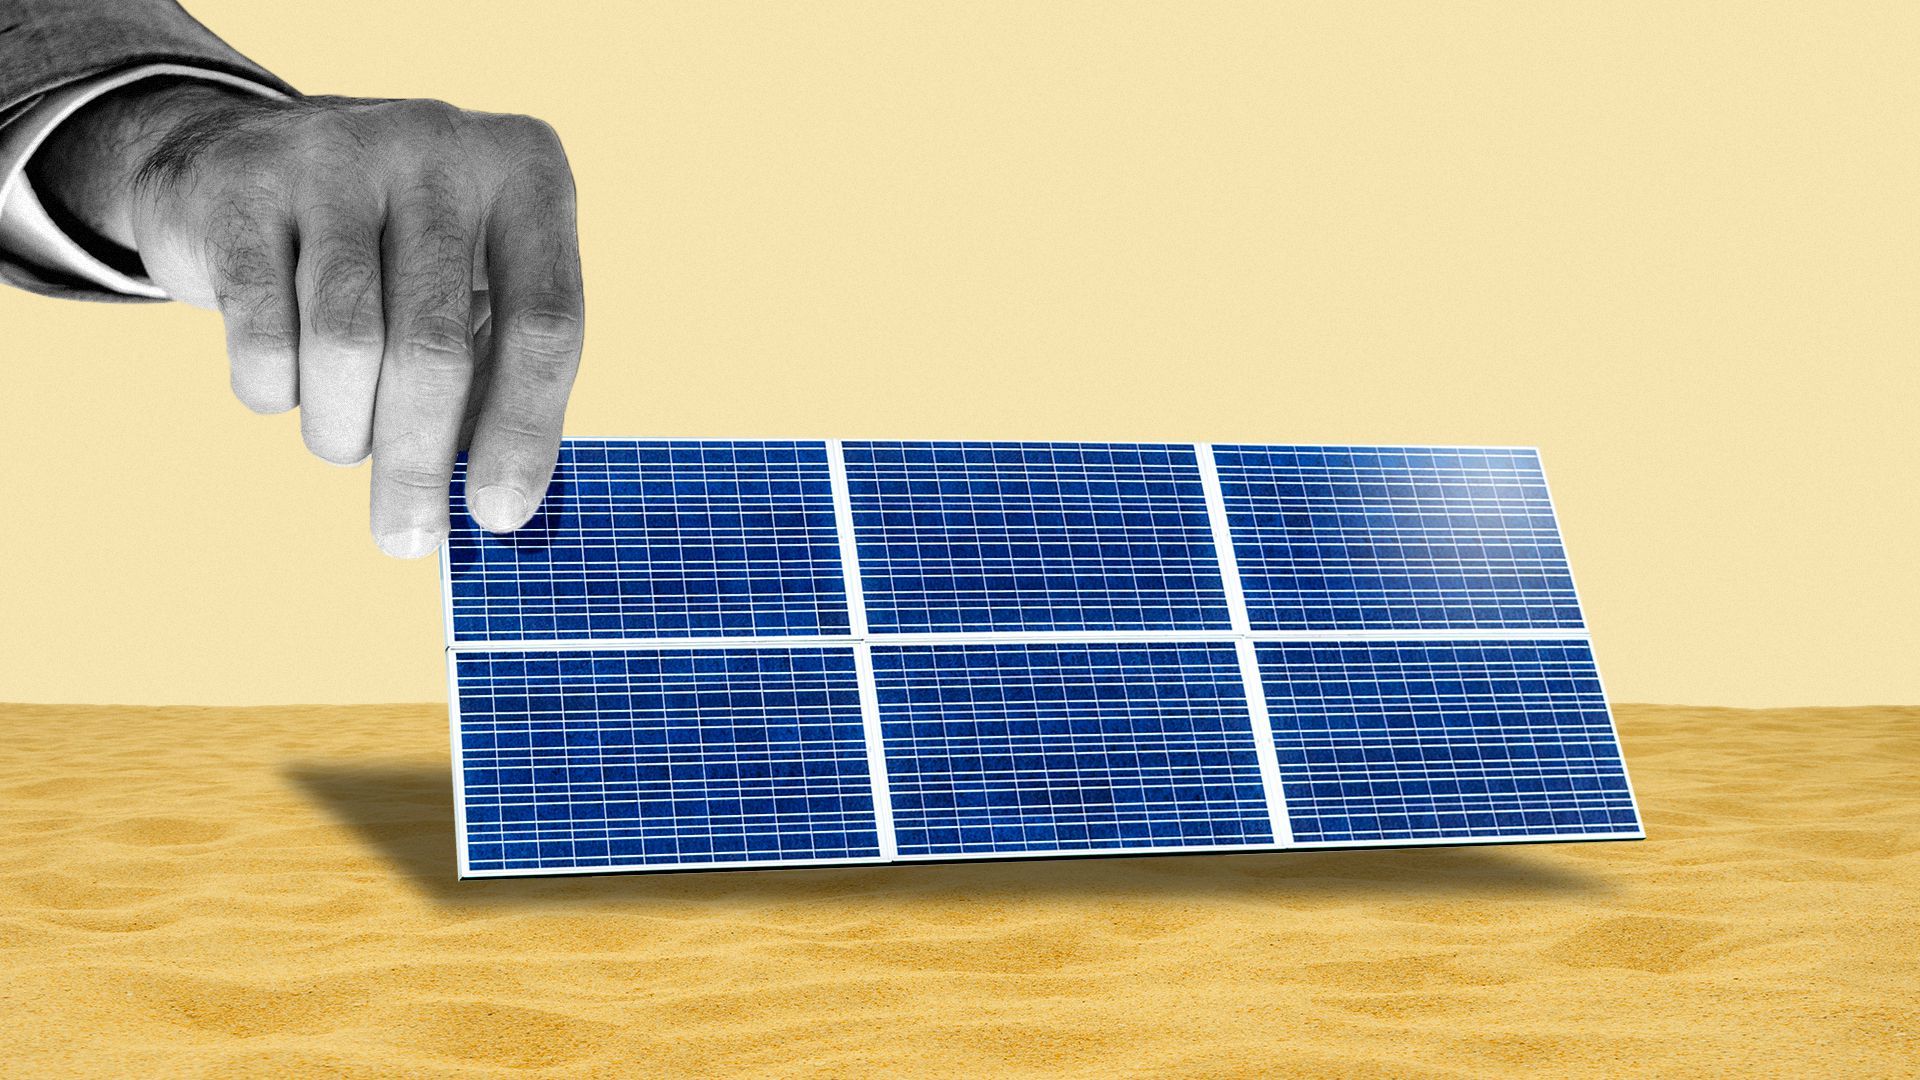 Illustration of a large hand placing a solar panel into desert sand